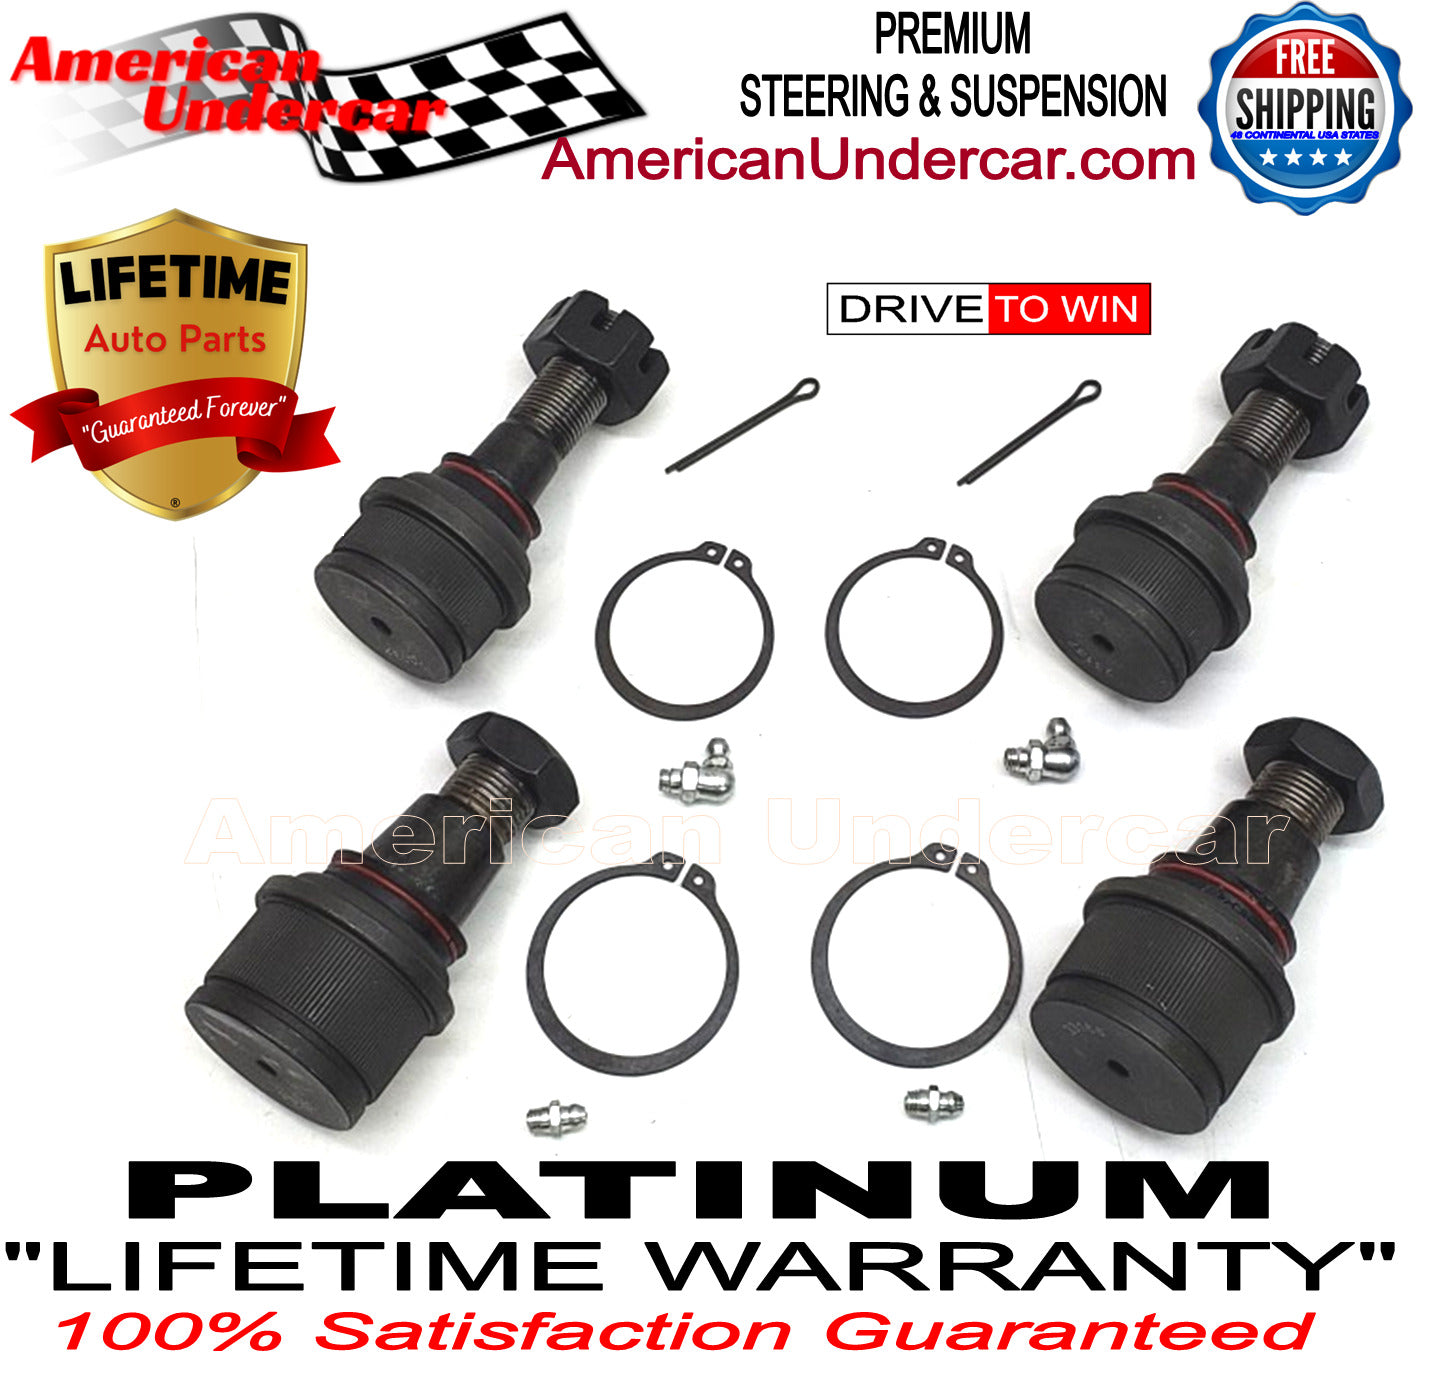 Lifetime Ball Joint Steering Suspension Kit for 2011-2016 Ford F450 Super Duty 2WD